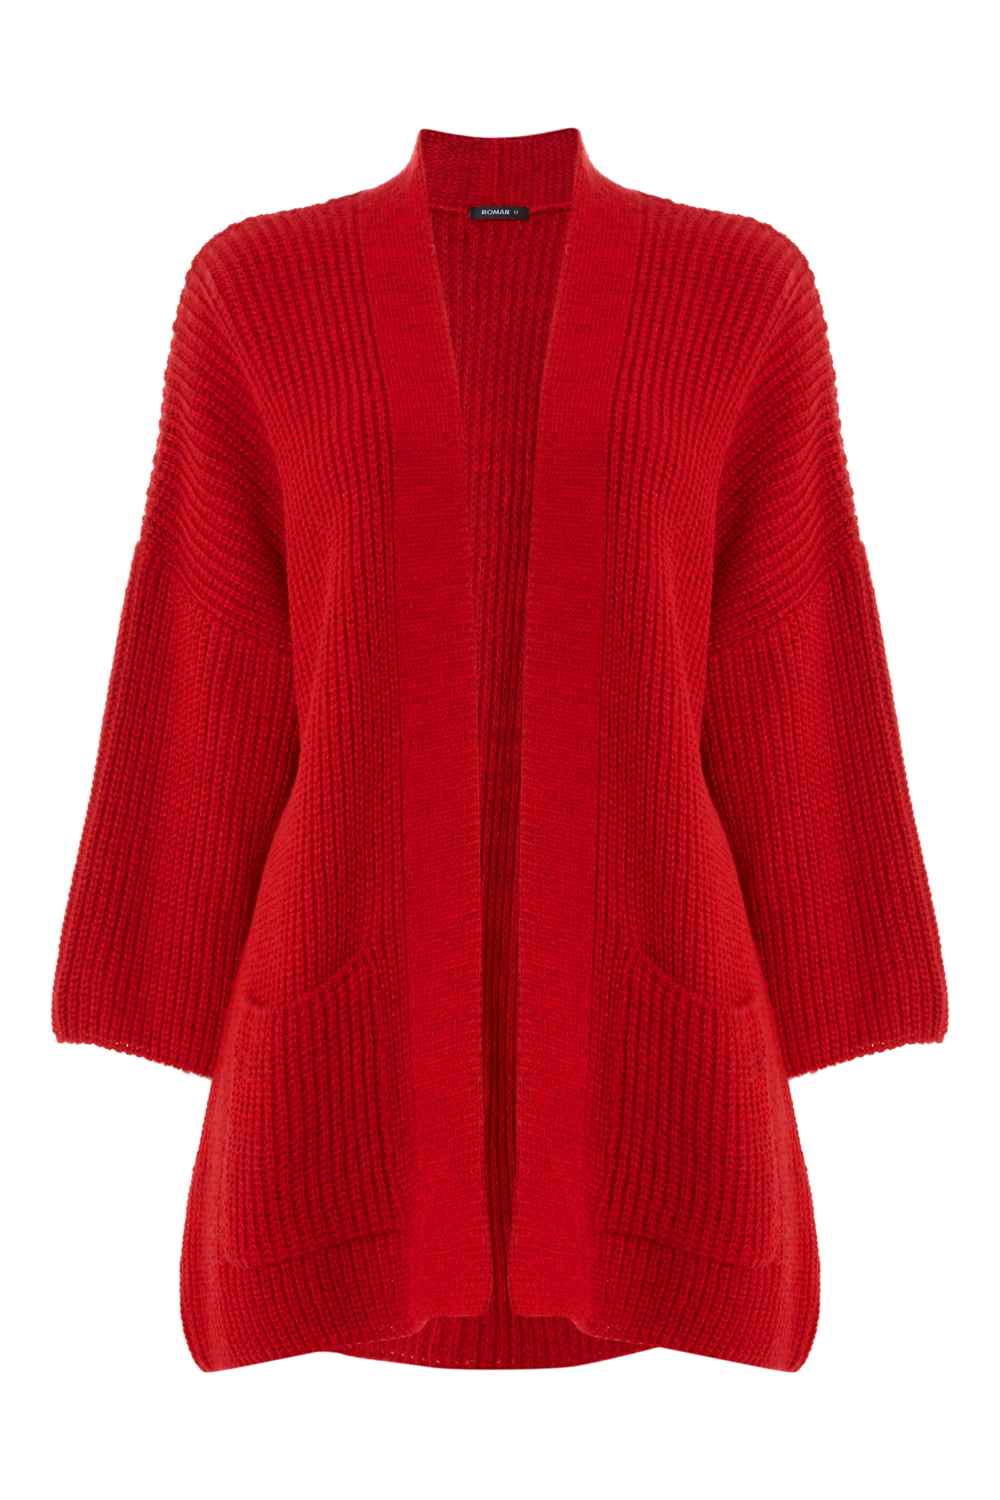 Red Ribbed Knit Cardigan, Image 4 of 4